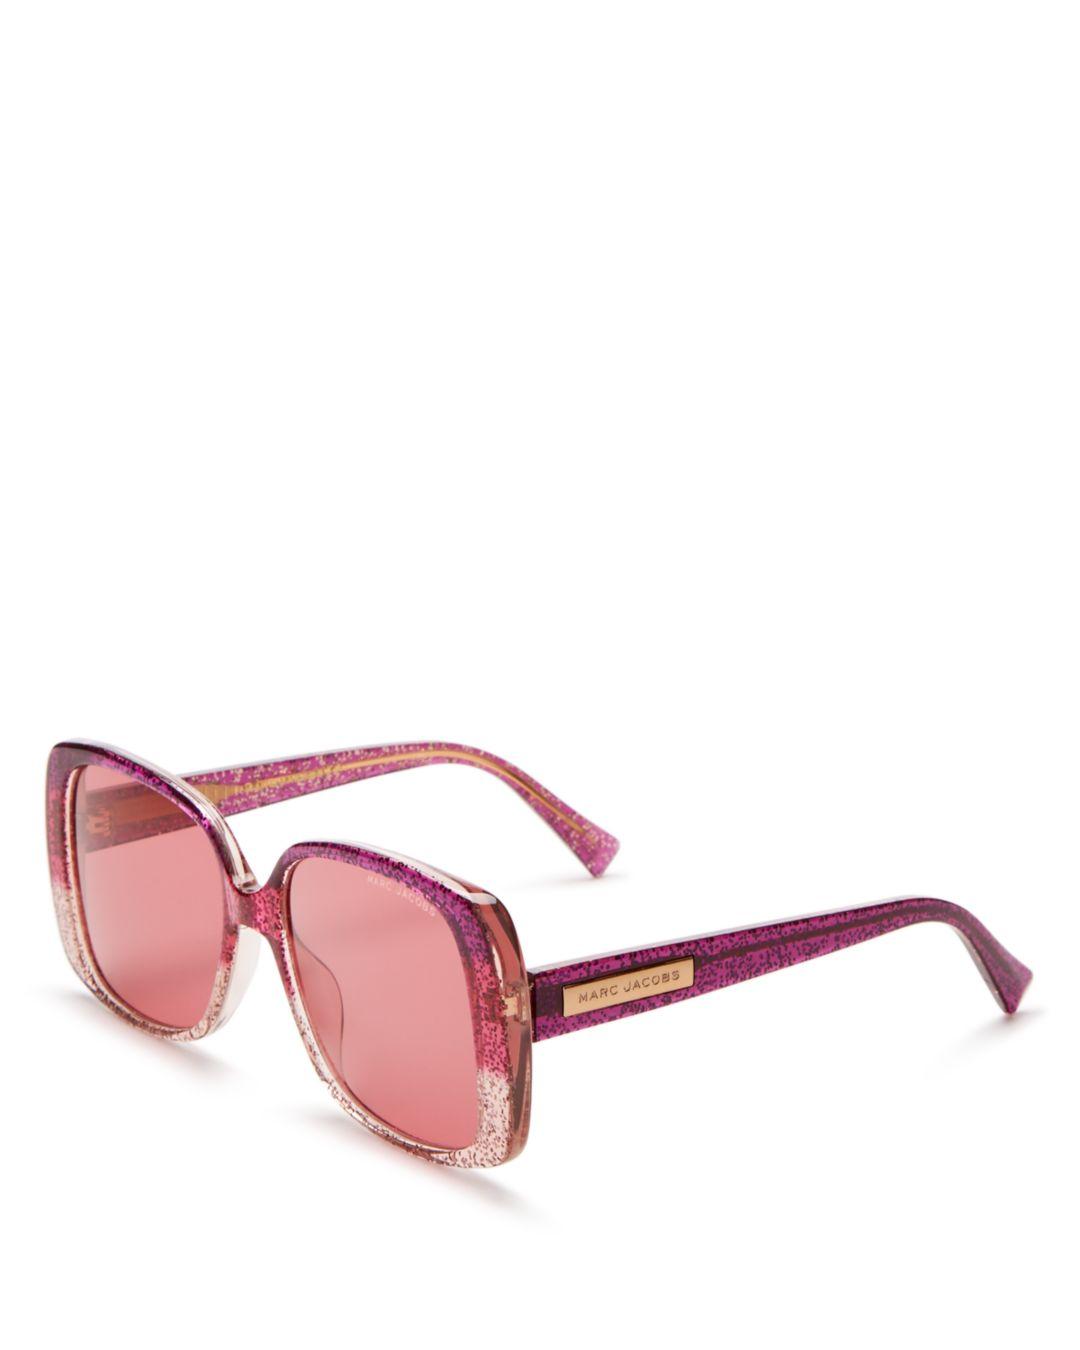 Marc Jacobs Women's Square Sunglasses in Violet Glitter/Burgundy (Pink) -  Lyst